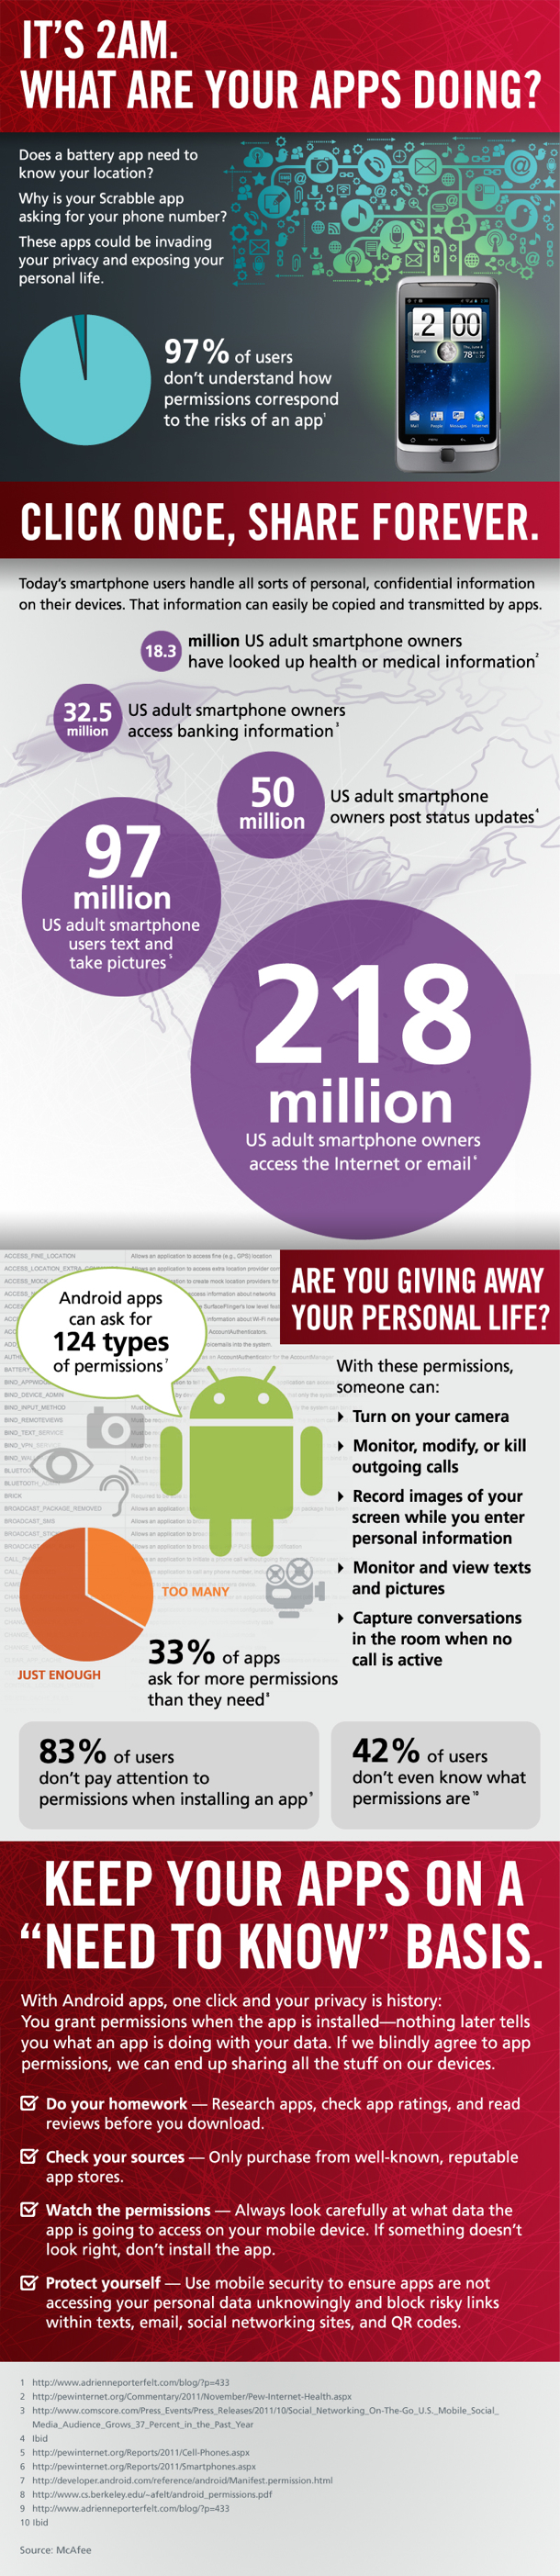 Mobile apps privacy infographic